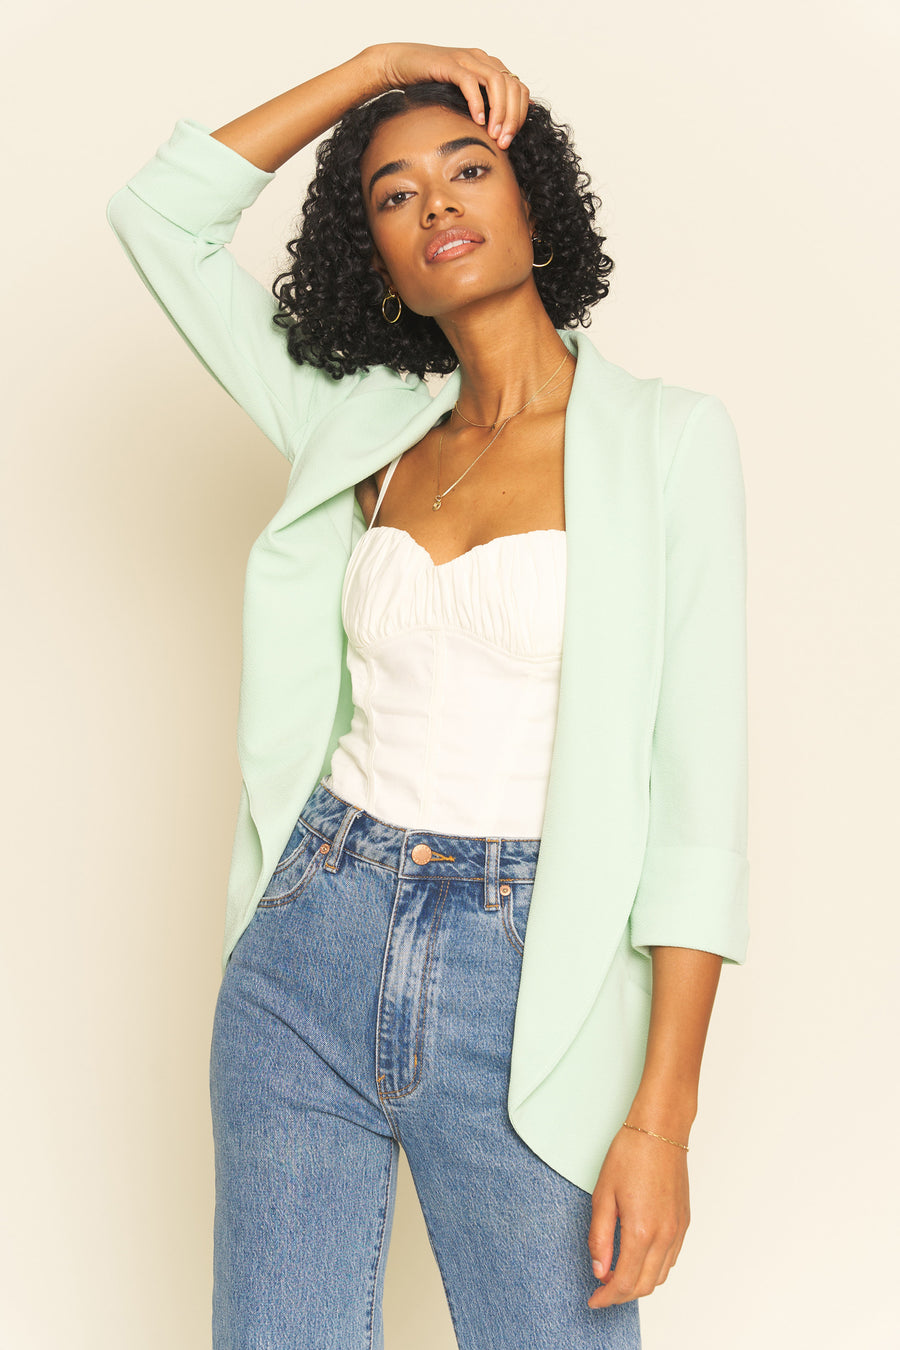 No Srcipt image - Images of 7 of 8 Classic Melanie Shawl Simple Staple Jade Green Color Workwear Blazer Jacket Everyday Shawl Front Pockets Best Seller Customer Favorite